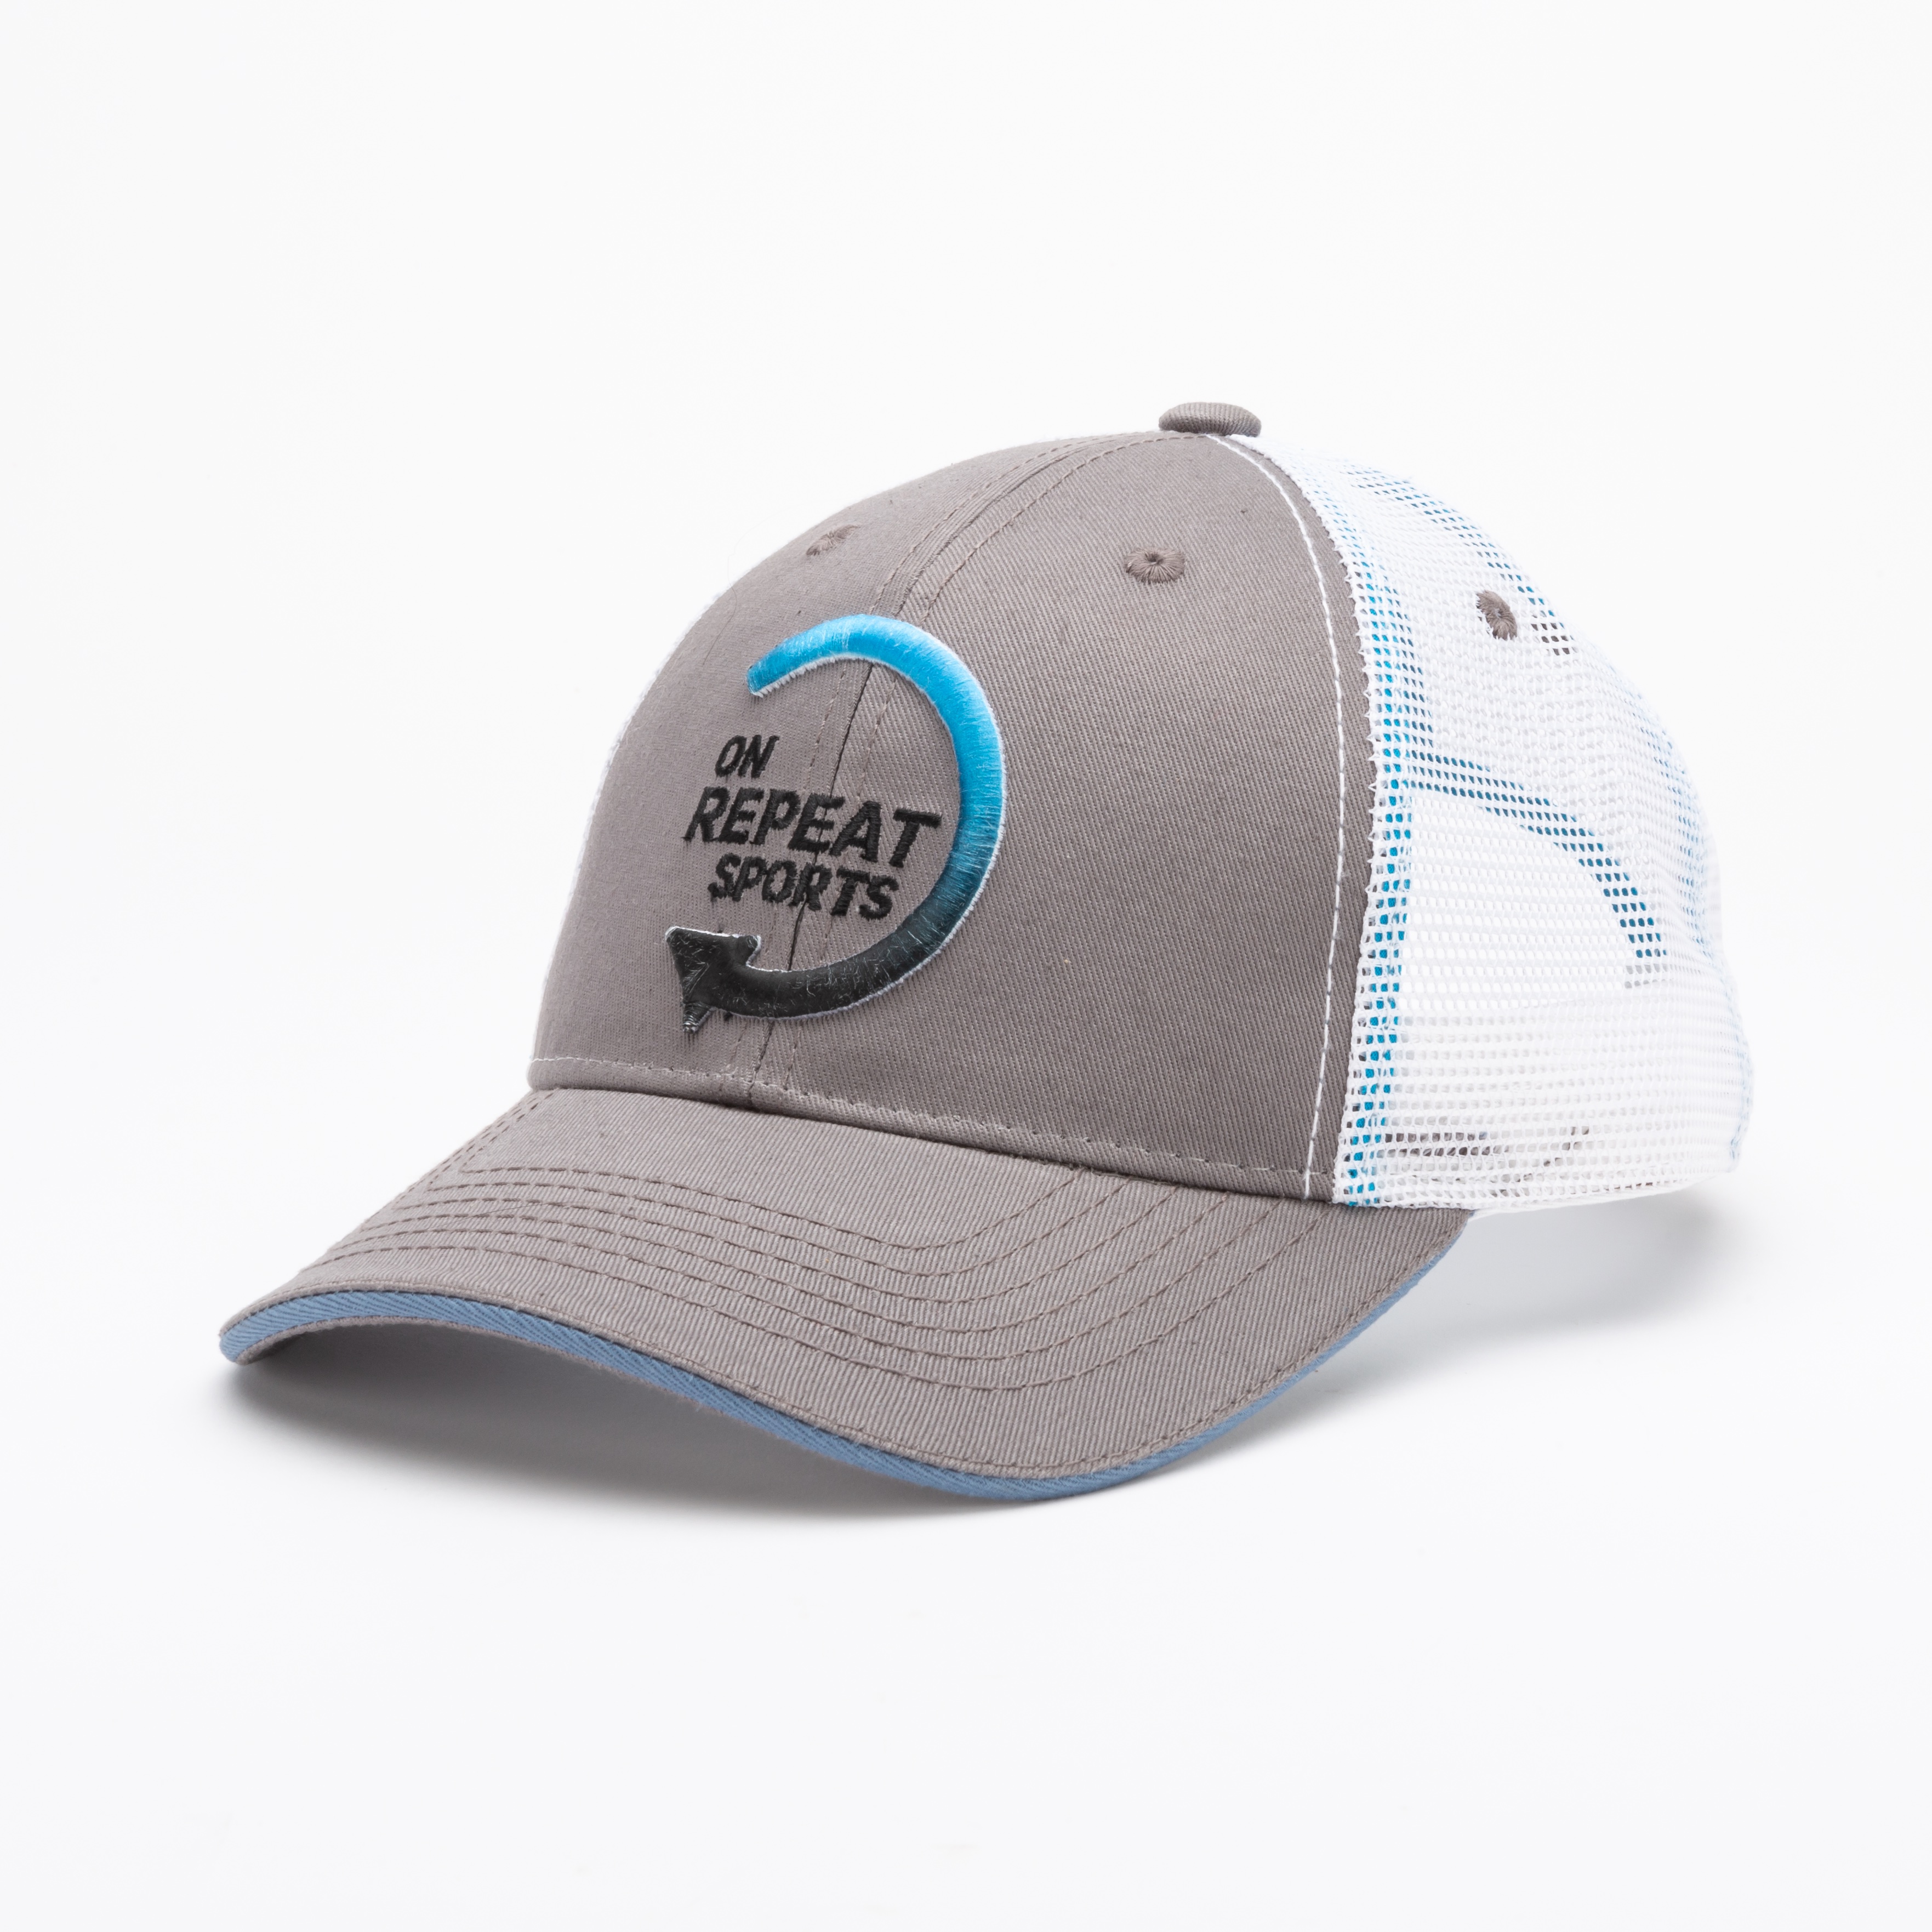 On Repeat Sports Hat